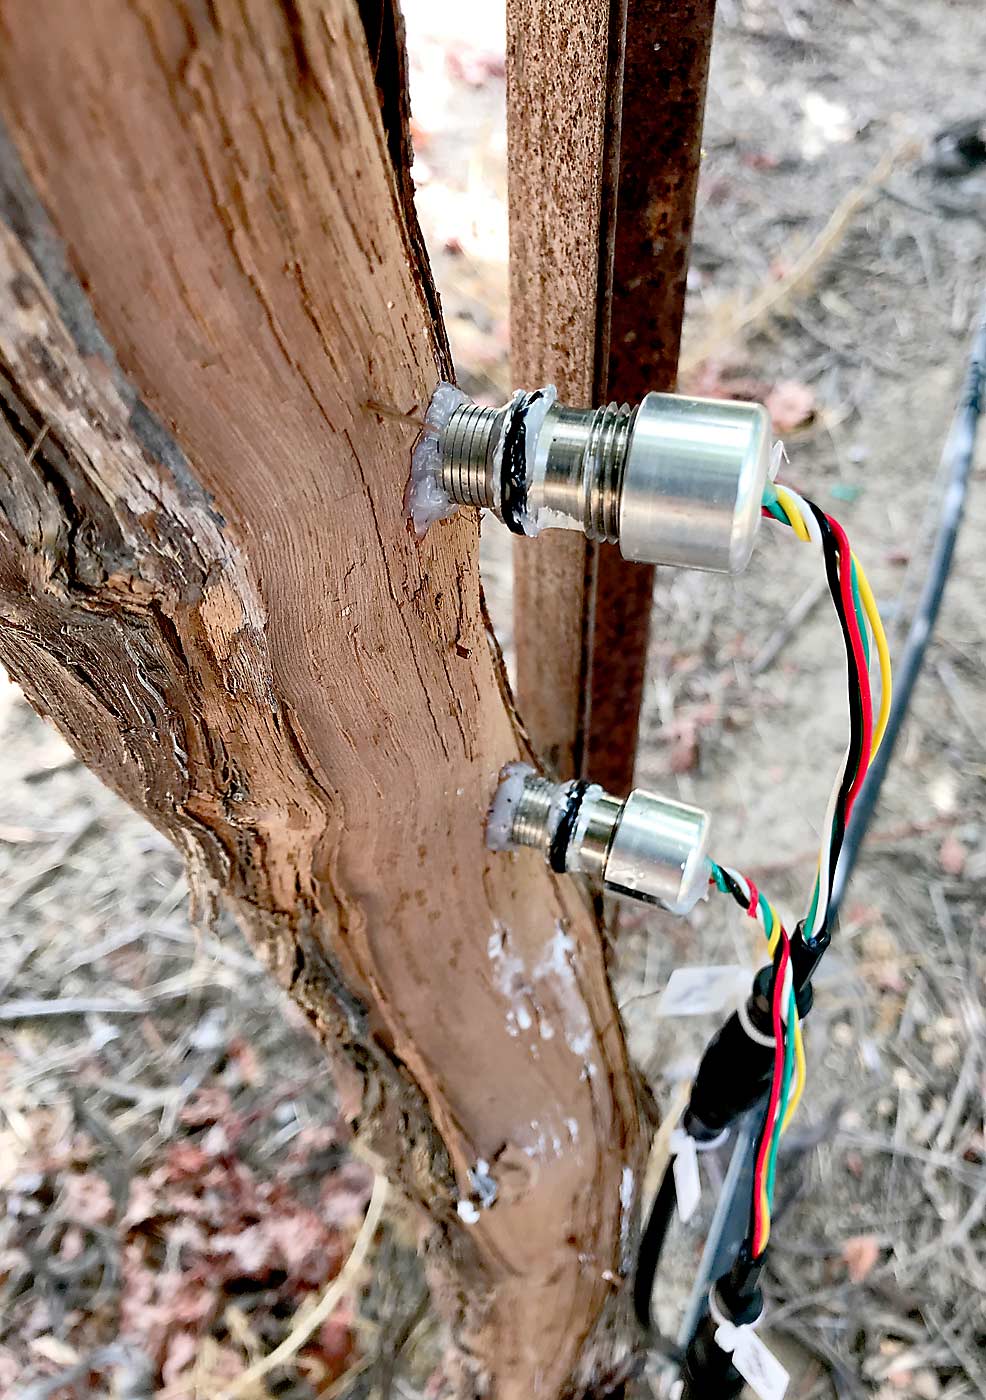 A new sensor technology developed at Cornell University plugs into a tree or vine to read stem water potential in real time, replacing weekly pressure chamber measurements for guiding irrigation management, according to retired physiologist Alan Lakso, who now works with the company created to commercialize it. (Courtesy FloraPulse)